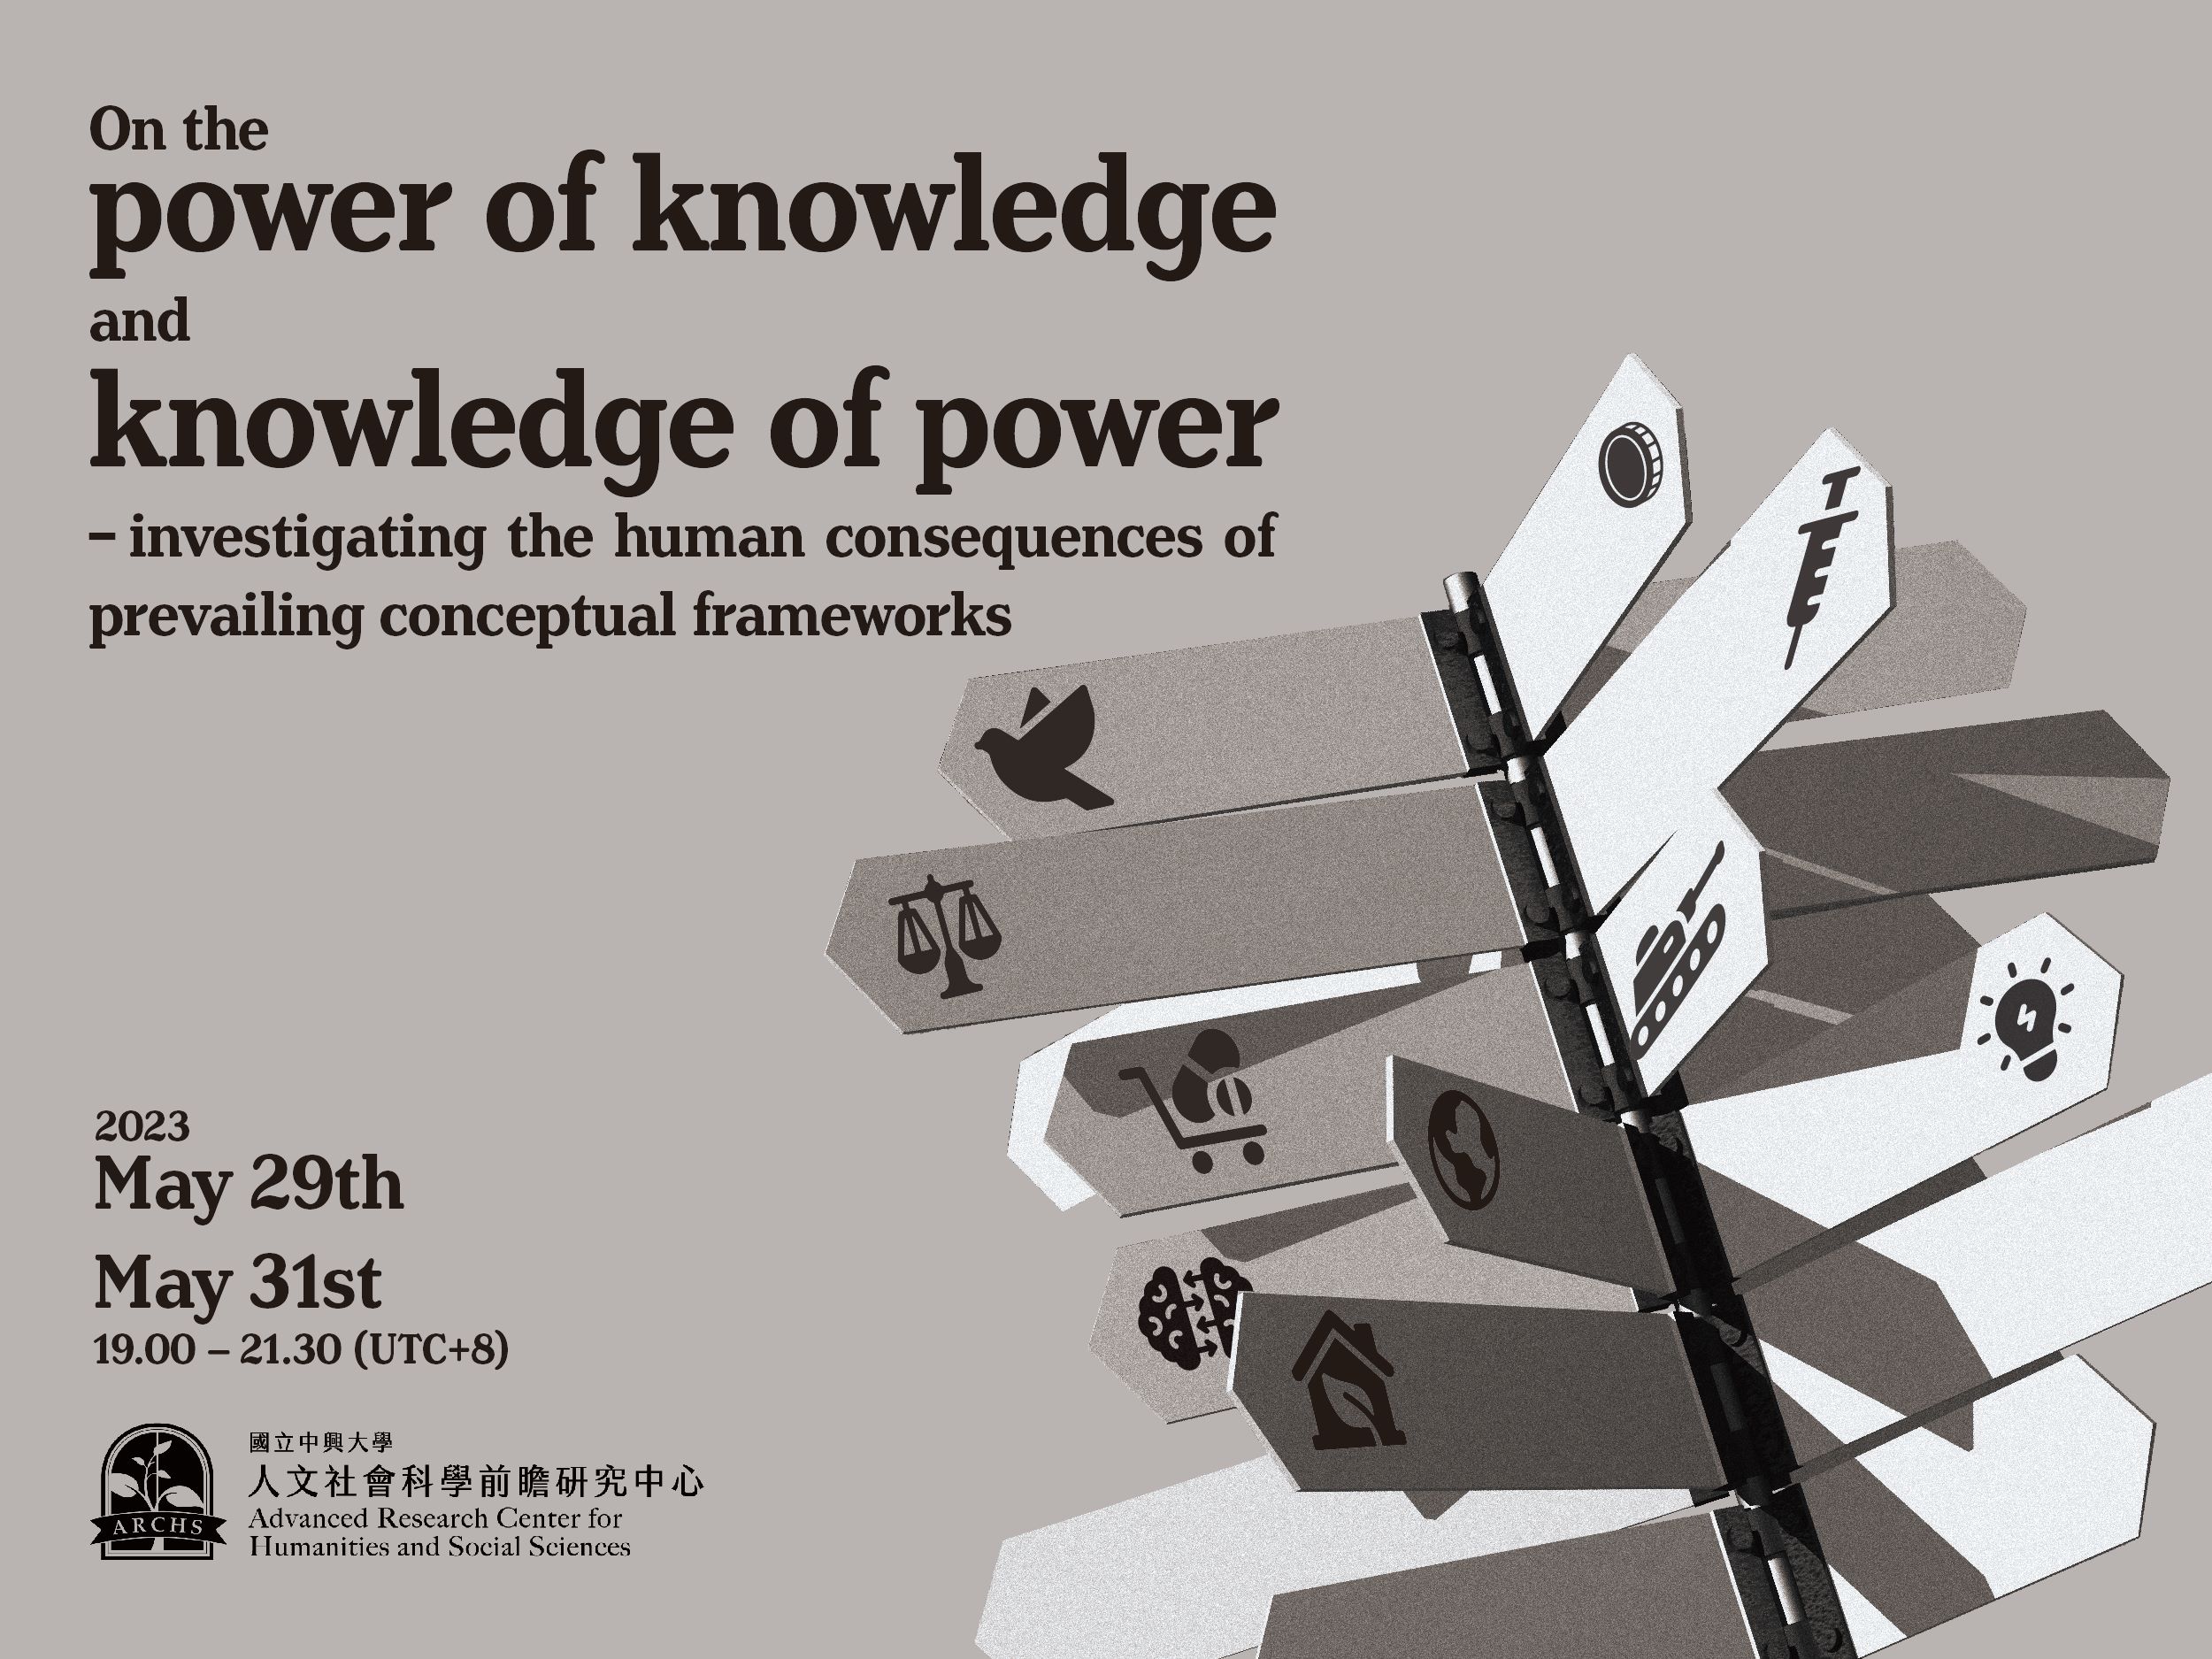 On the power of knowledge and knowledge of power – investigating the human consequences of prevailing conceptual frameworks